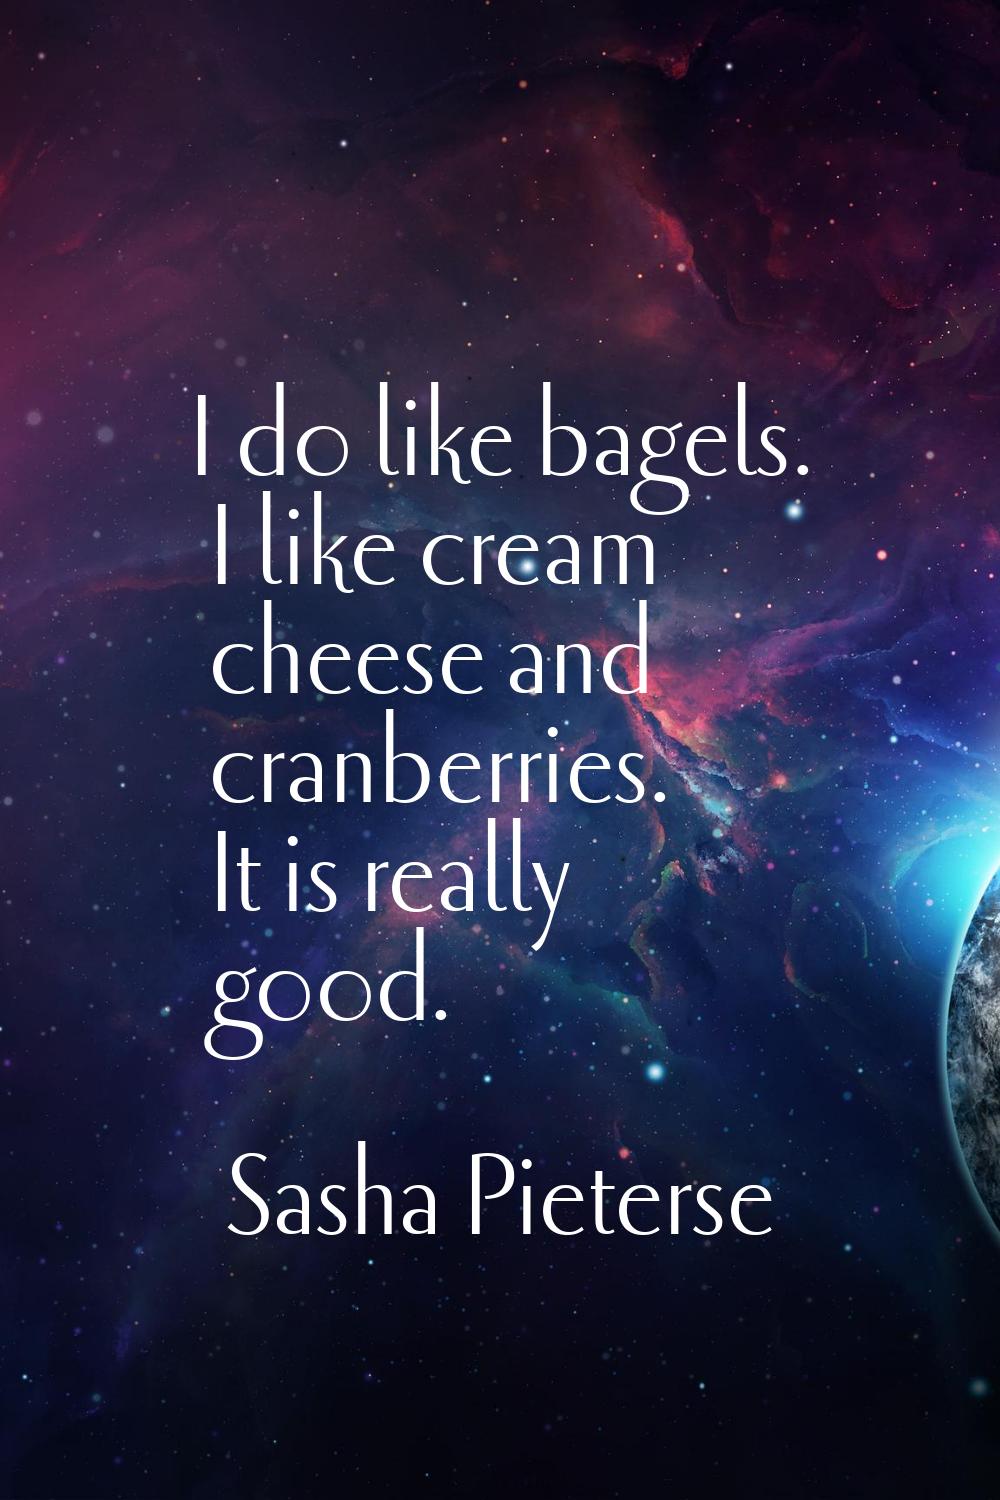 I do like bagels. I like cream cheese and cranberries. It is really good.